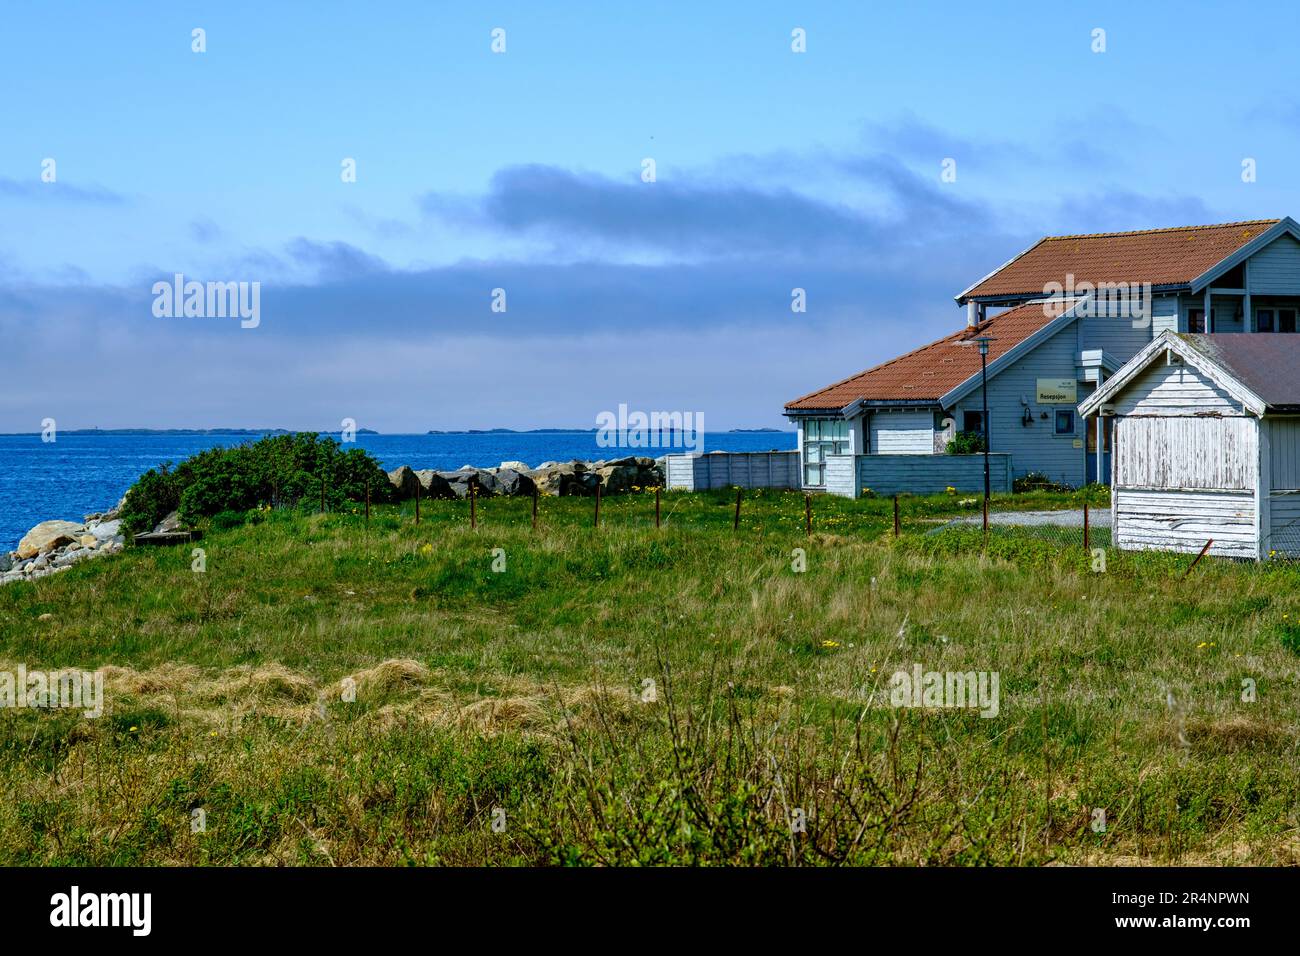 Olberg; Olbergstranden; Raege; Norway; May 20 2023, Traditional Wooden Build Norwegain House Looking Out To Sea Surrounded By Green Grass Fillds With Stock Photo